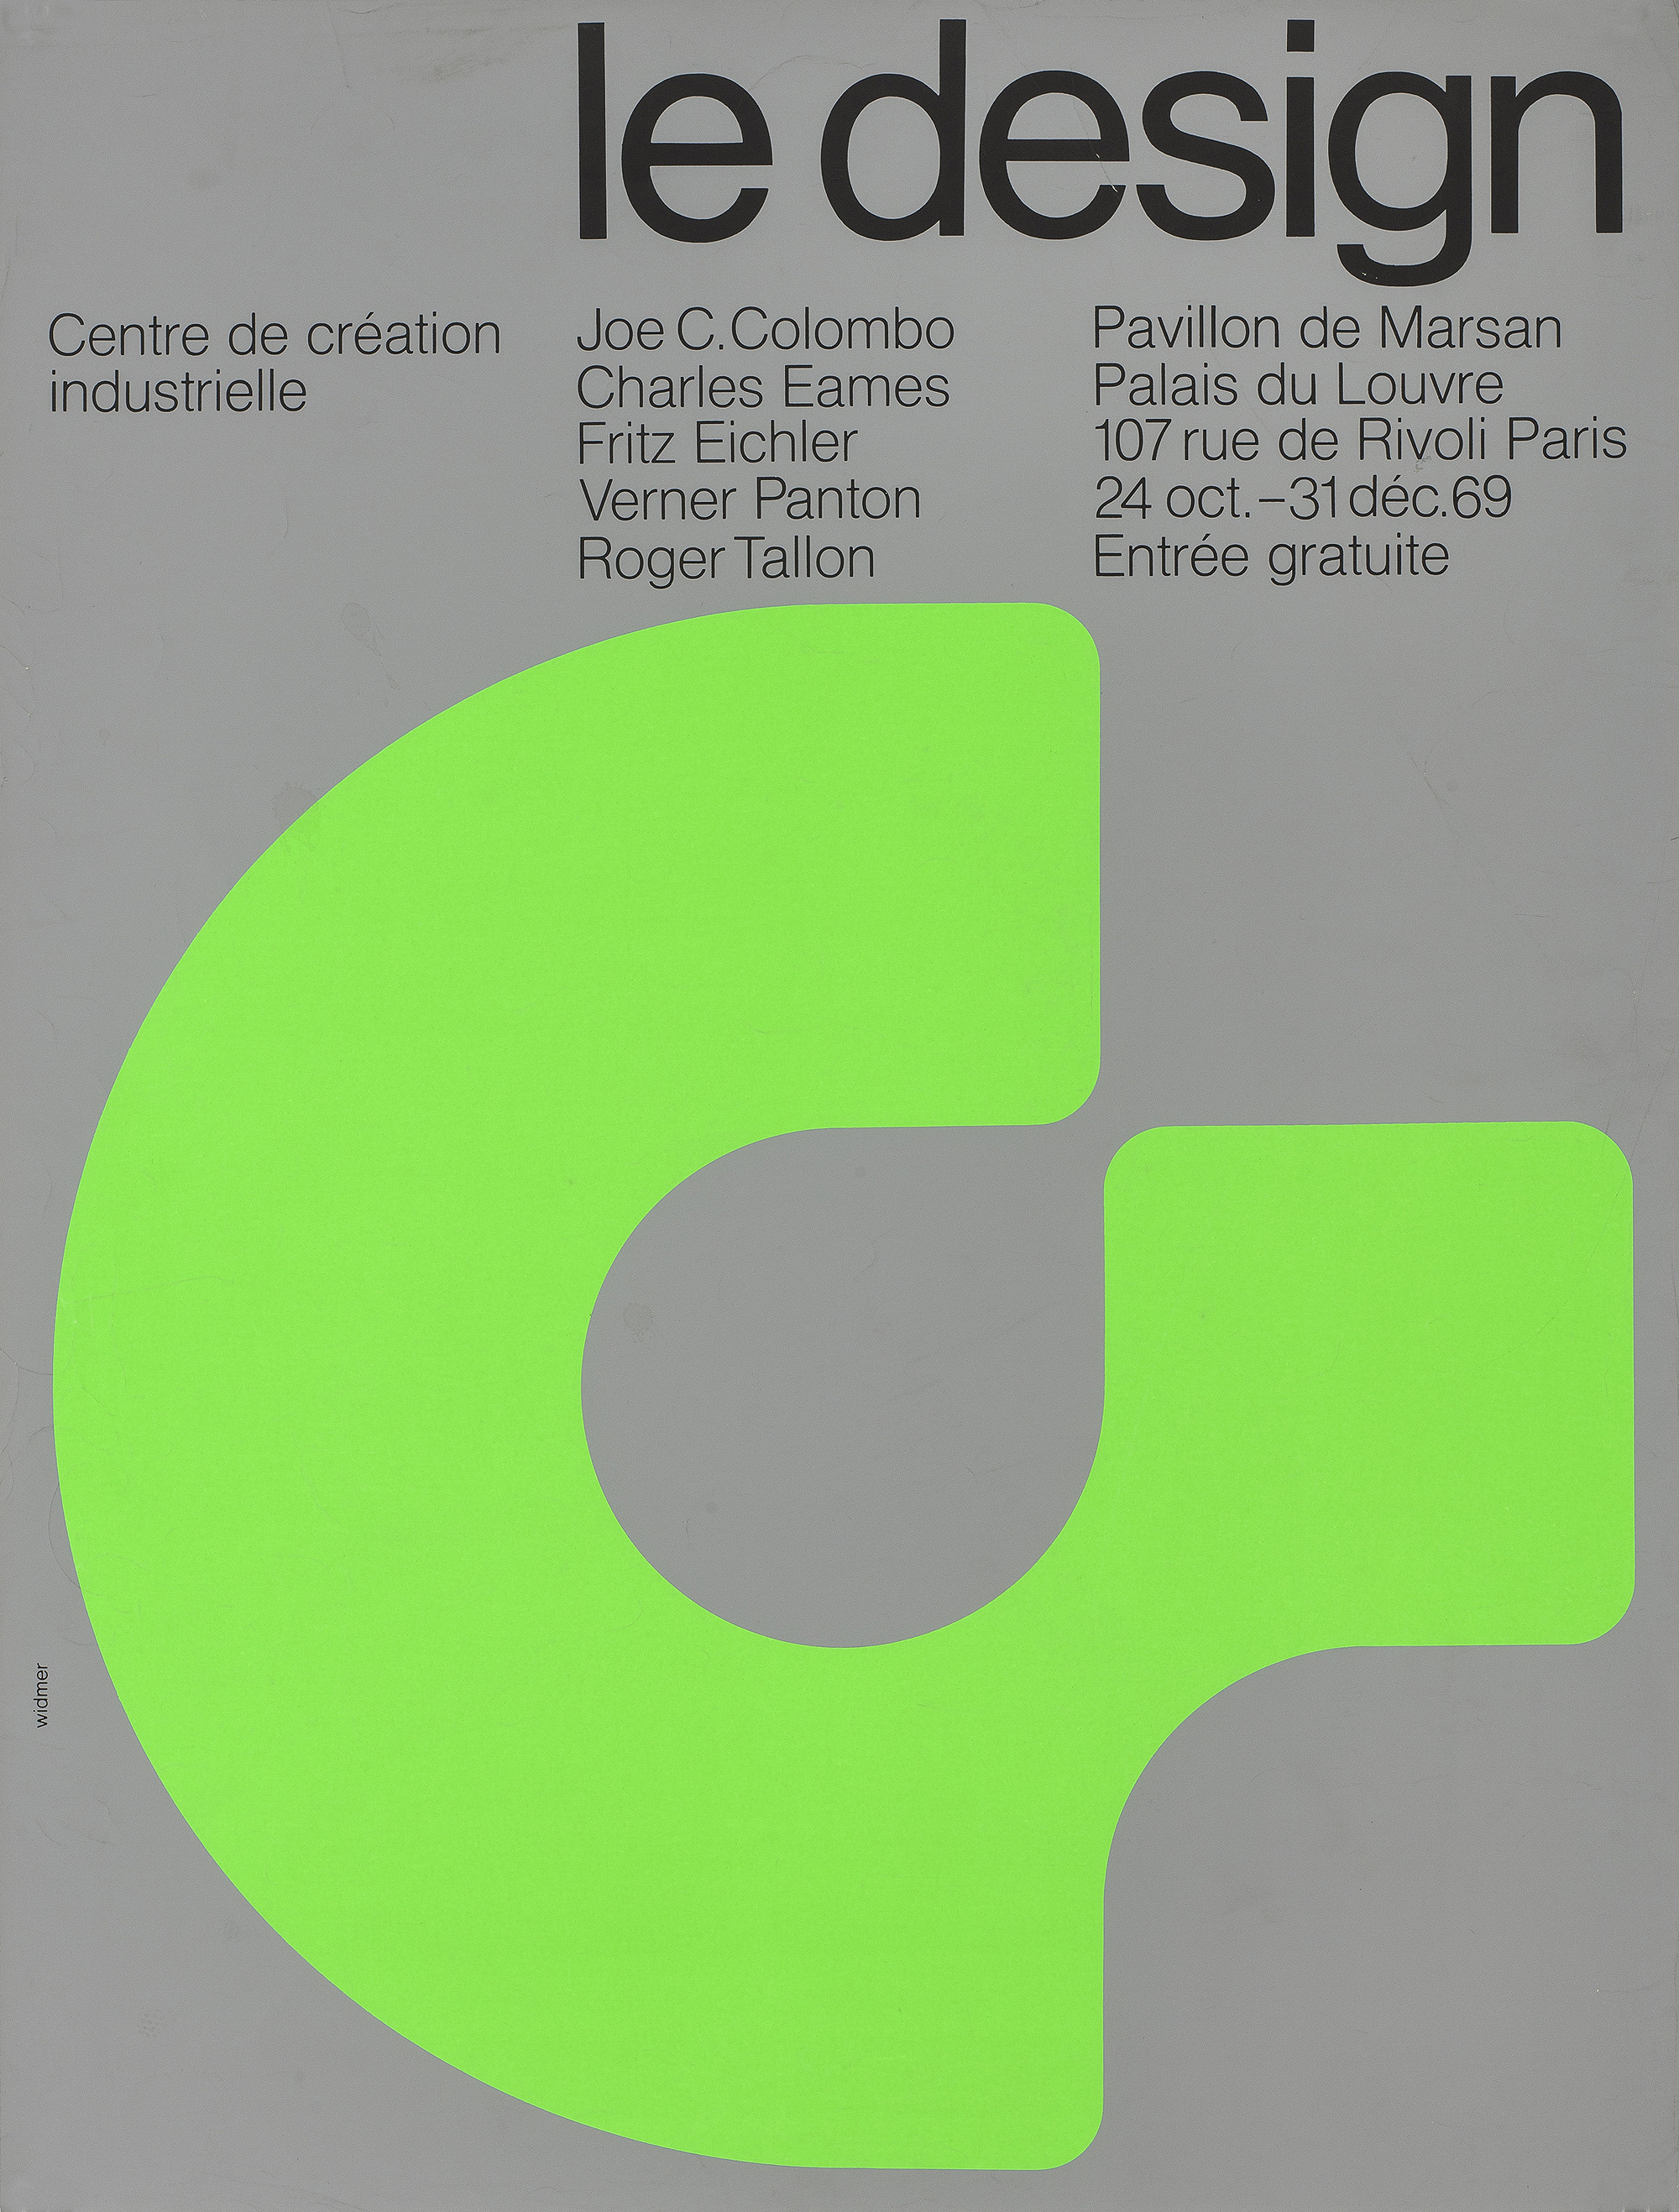 Charles Eames Poster The Design. 24 October to 31 December 1969 »Jean Widmer 1969. Paper, color screen printing. Sponsored by the Industrial Design Center